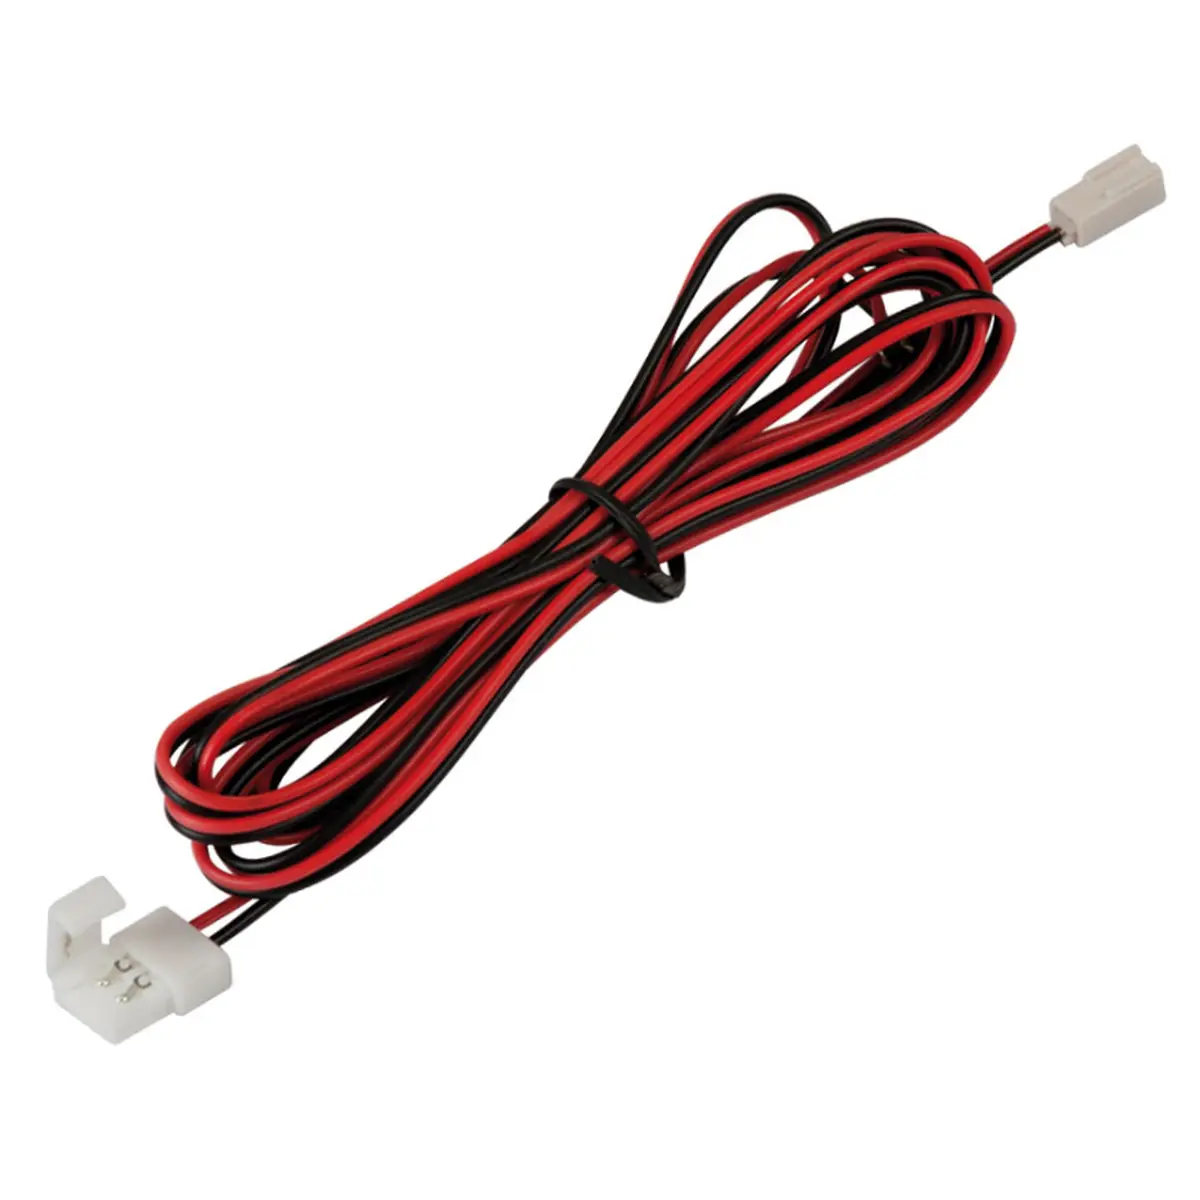 ALLEGRA CABLE 2M WITH MALE PLUG & LED STRIP CLIP